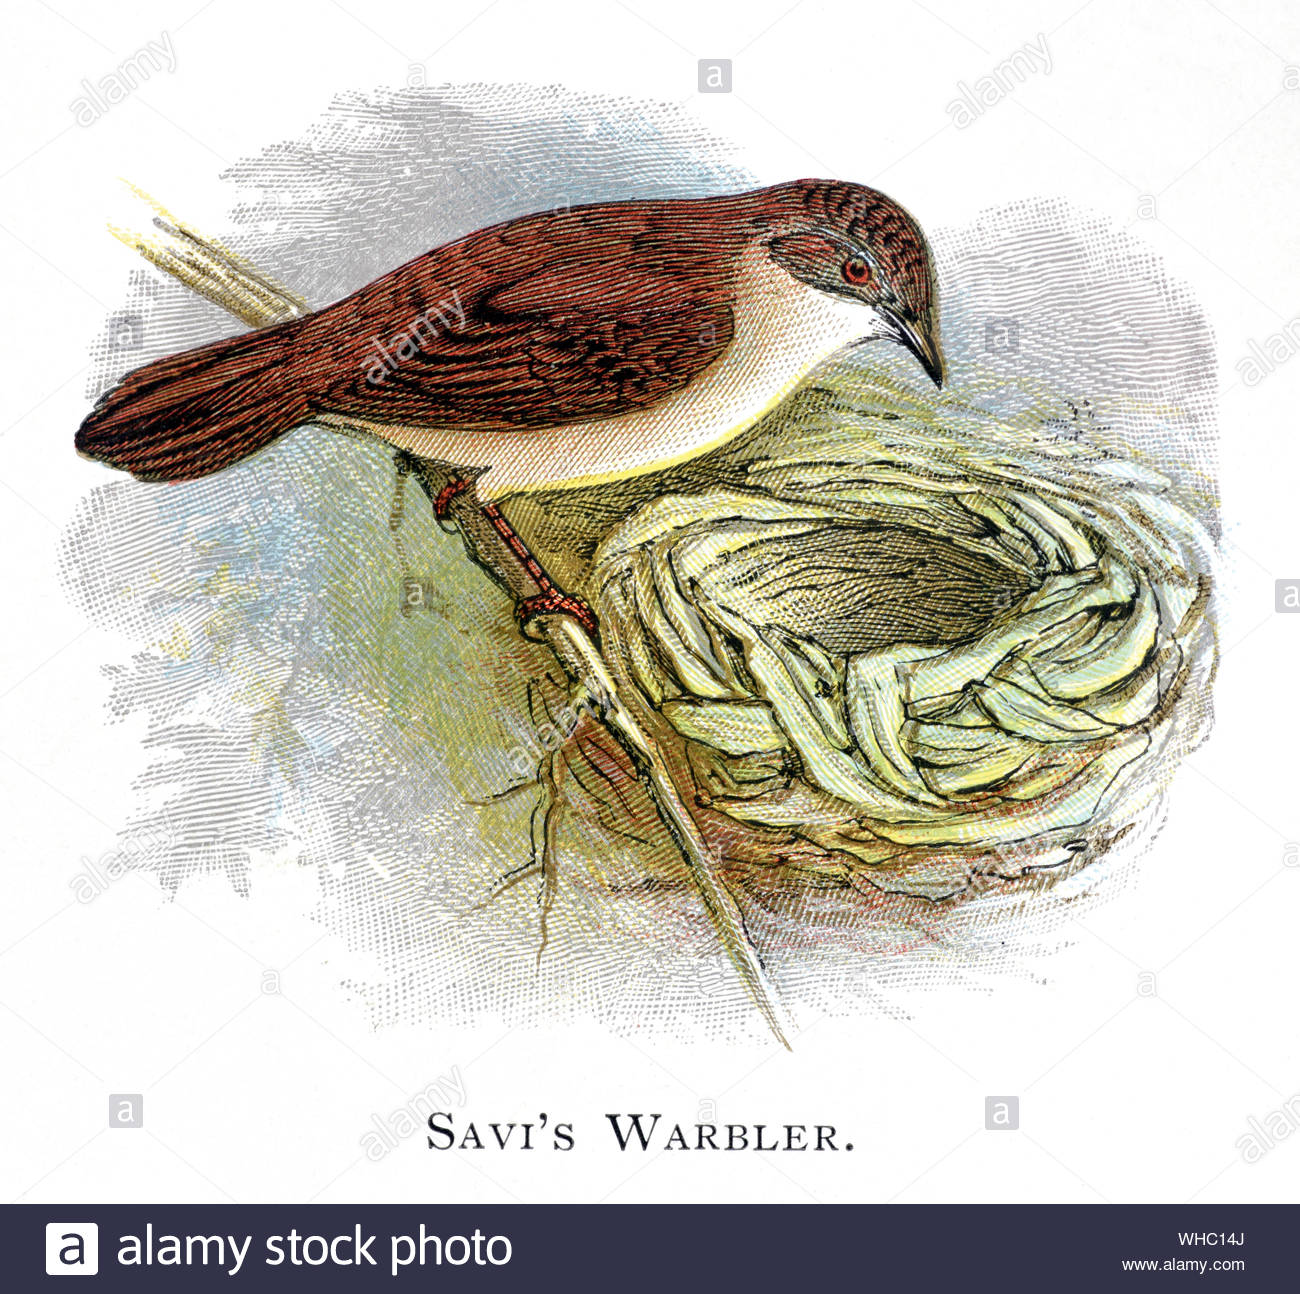 Savi's Warbler (Locustella luscinioides) at the nest with eggs, vintage illustration published in 1898 Stock Photo